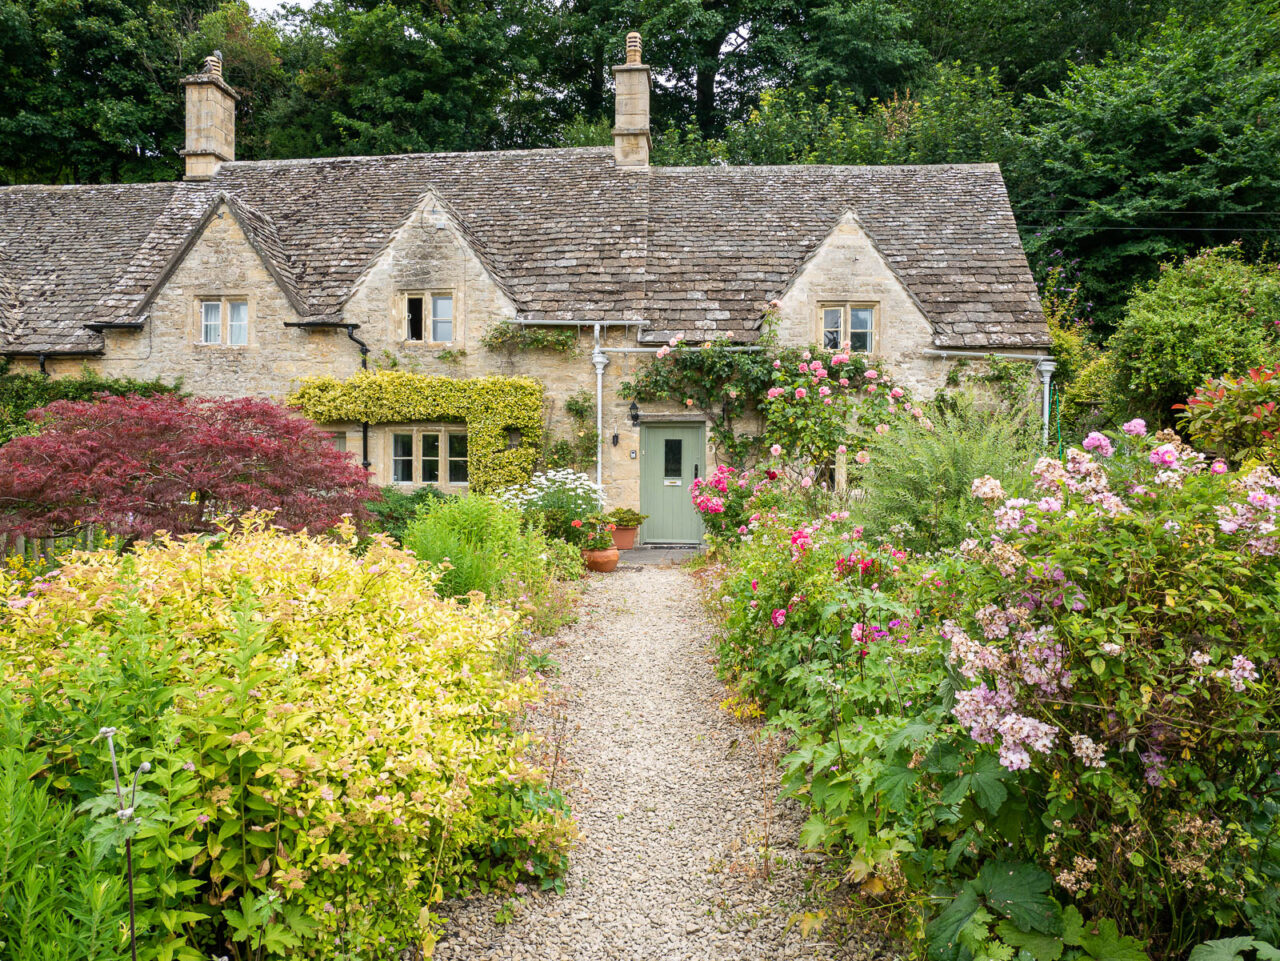 Pretty cottage covered in flowers in the Cotswolds England